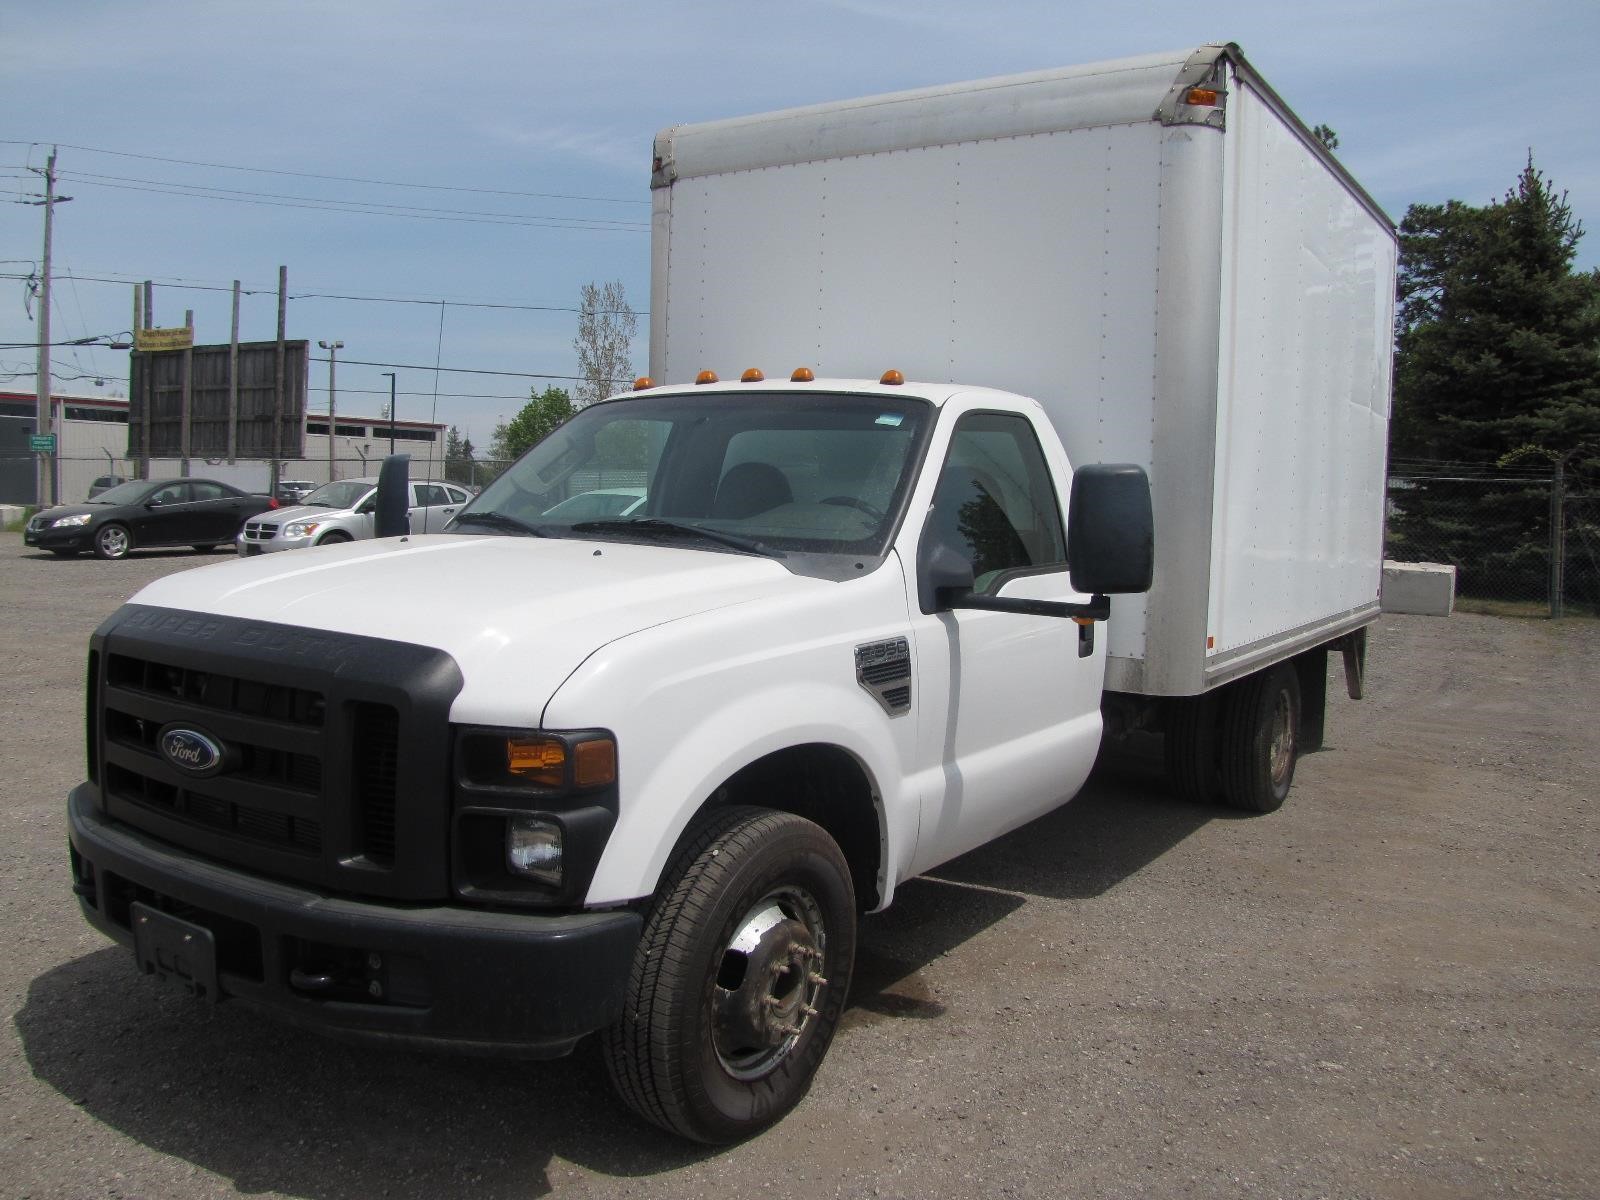 MAY 26 - ONLINE REPOSSESSED VEHICLE AUCTION